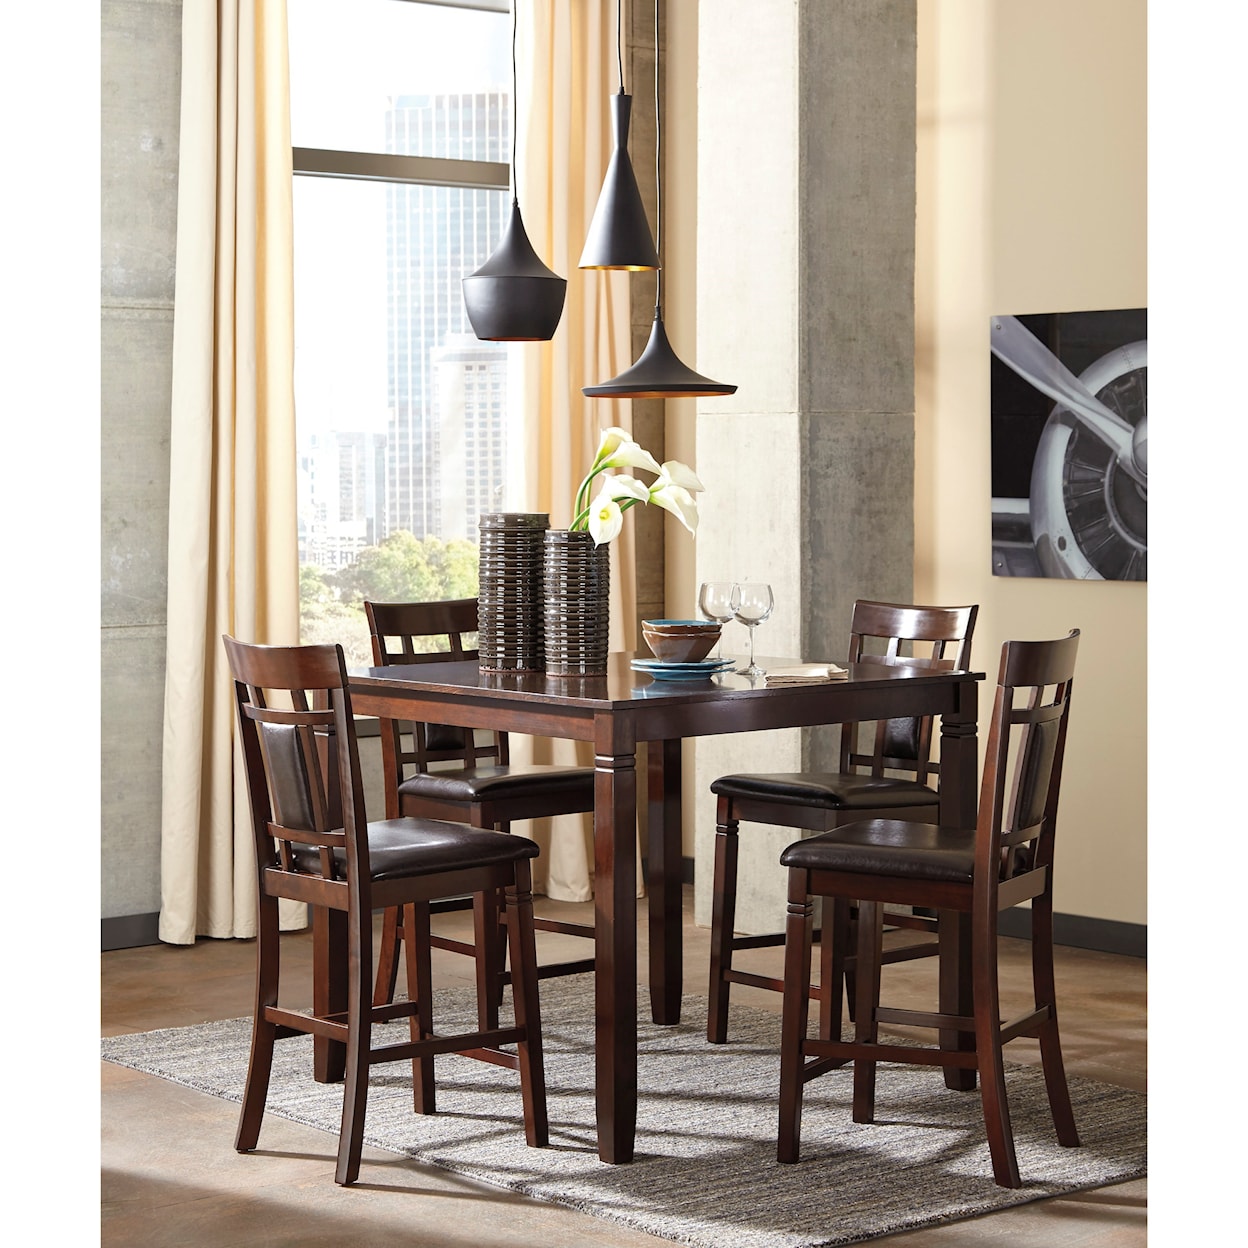 Signature Design by Ashley Bennox 5pc Dining Room Group